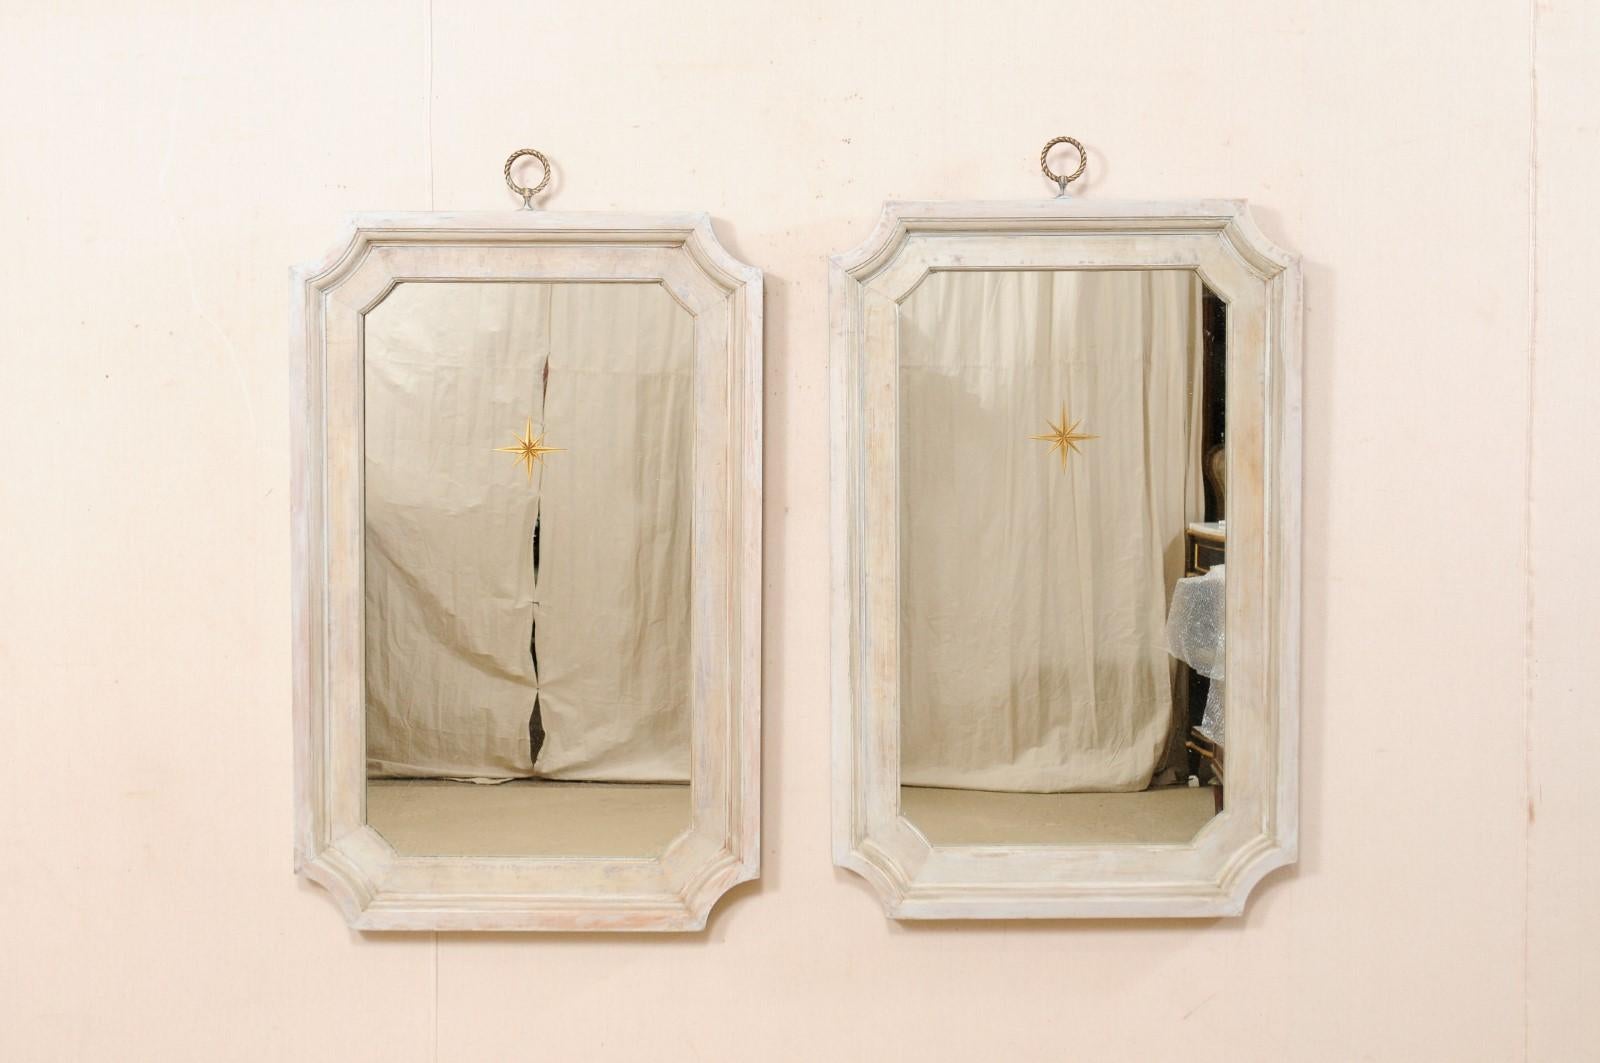 A pair of Artisan-made mirrors with gold églomisé sunbursts, within carved and painted wood frames. This pair of mostly rectangular-shaped mirrors have been artisan crafted with a clear mirrored center, which is minimally adorn with a single gold